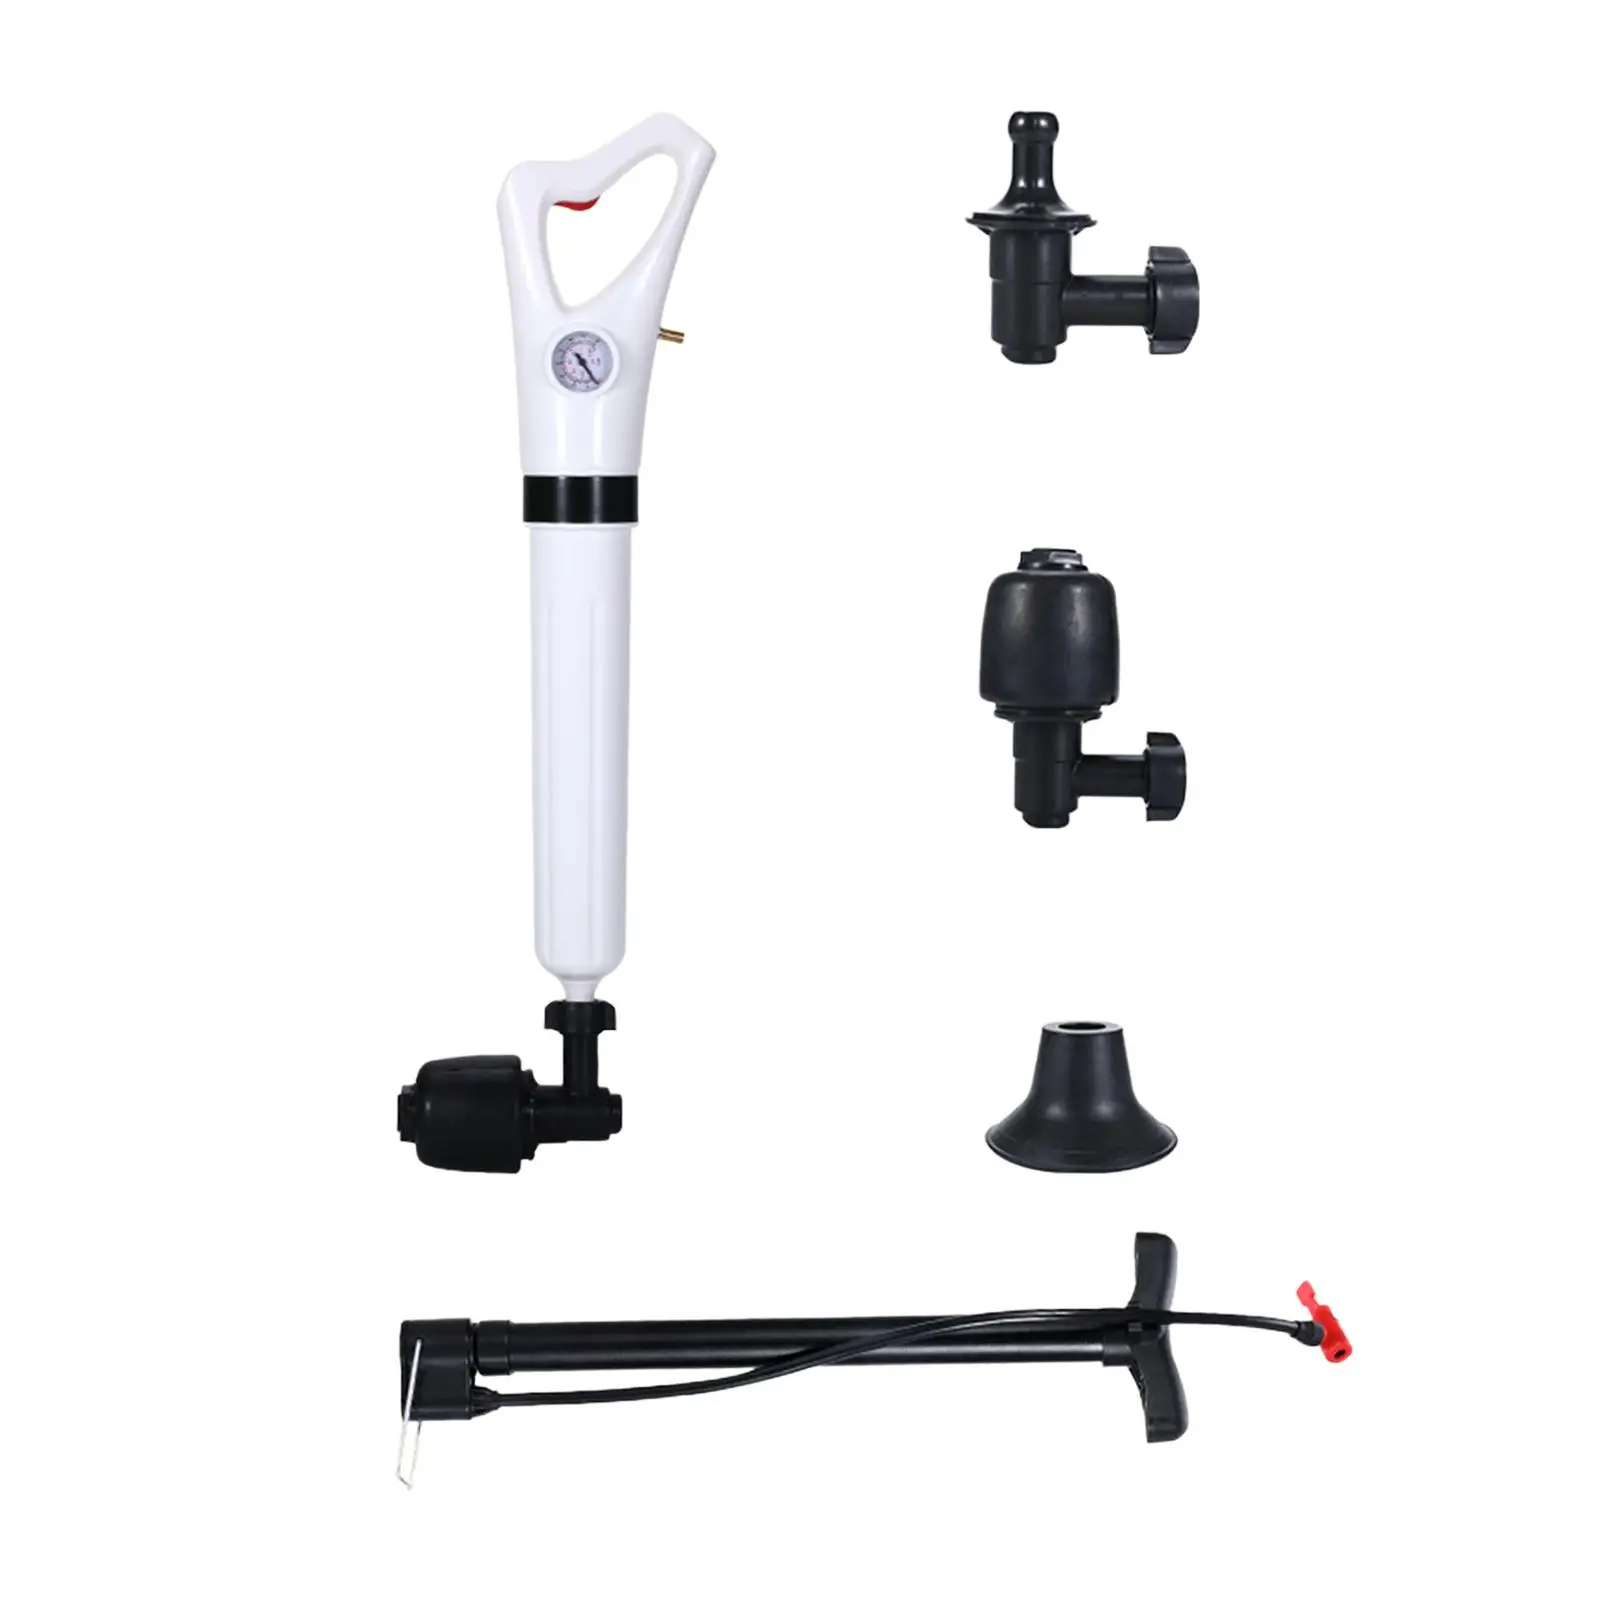 Toilet Plunger Set Plumbing Tools with Replaceable Heads Sewer Dredge Tool for Toilet Drains Piping Floor Drains Kitchen Squat